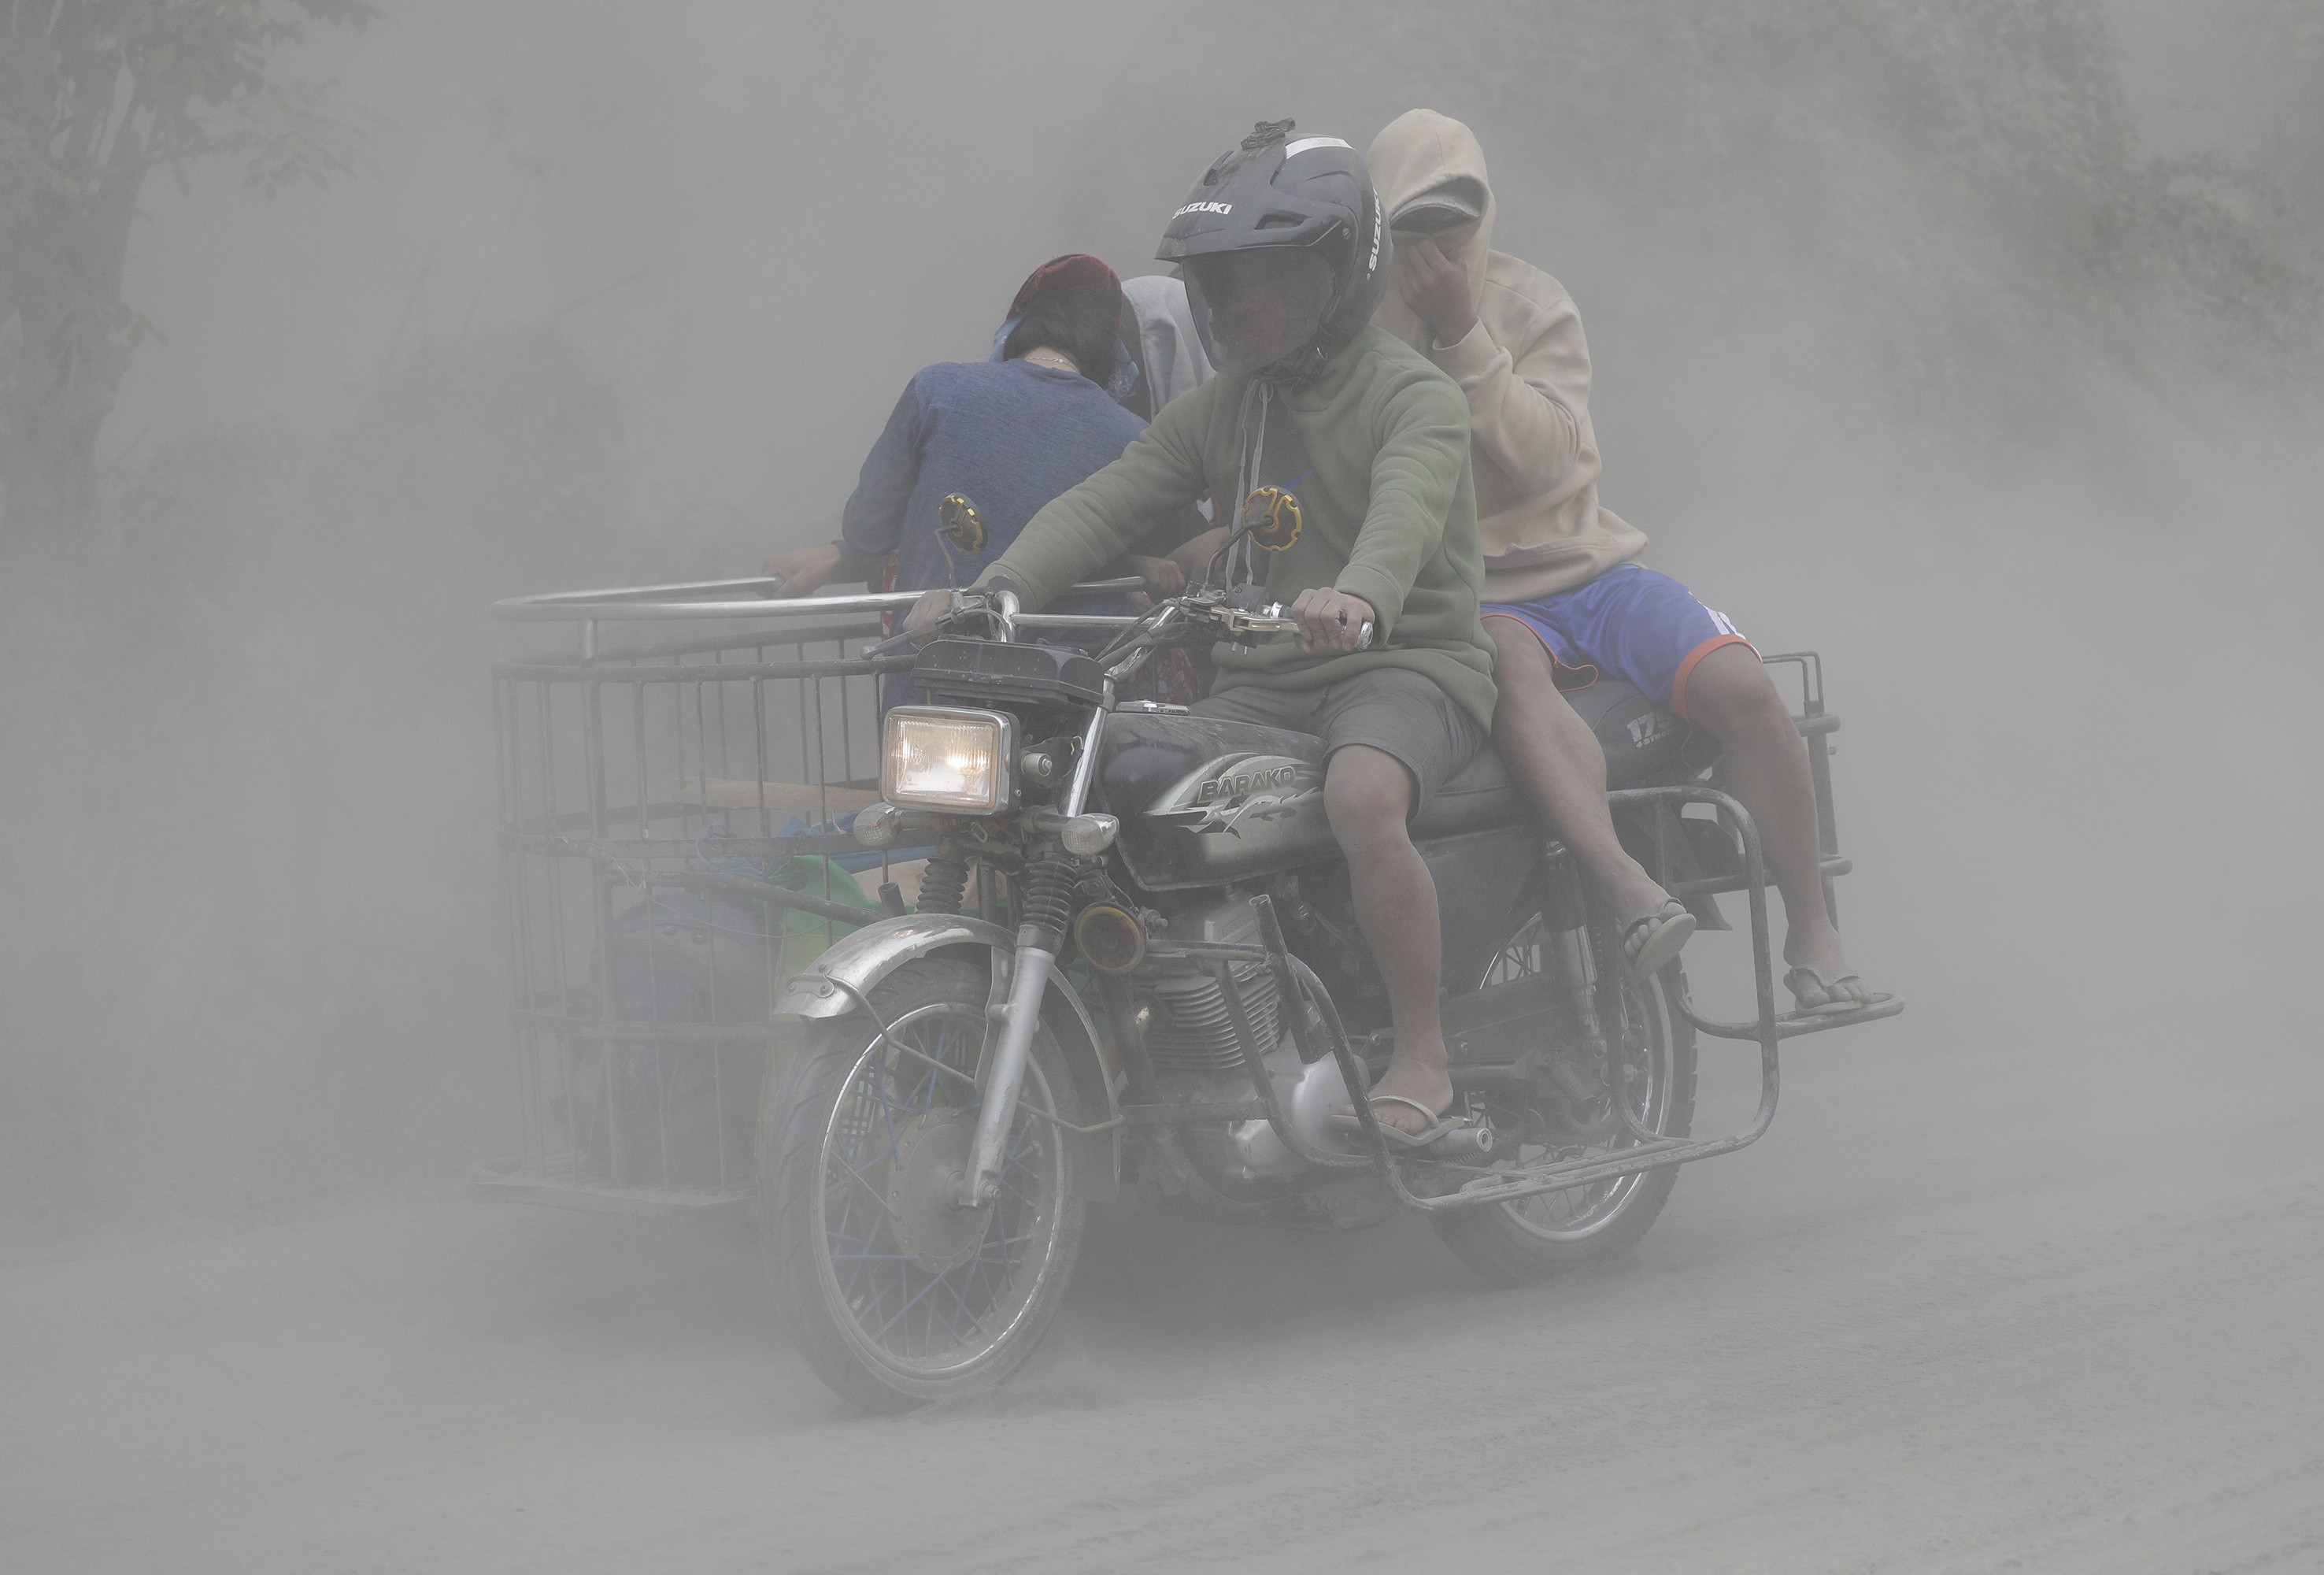 In this Jan. 13, 2020, photo, a family rides their motorcycle through clouds of ash as they evacuate to safer grounds as Taal volcano in Tagaytay, Cavite province, southern Philippines. Red-hot lava is gushing from the volcano after a sudden eruption of ash and steam that forced residents to flee and shut down Manila’s airport, offices and schools. (AP Photo/Aaron Favila, File)